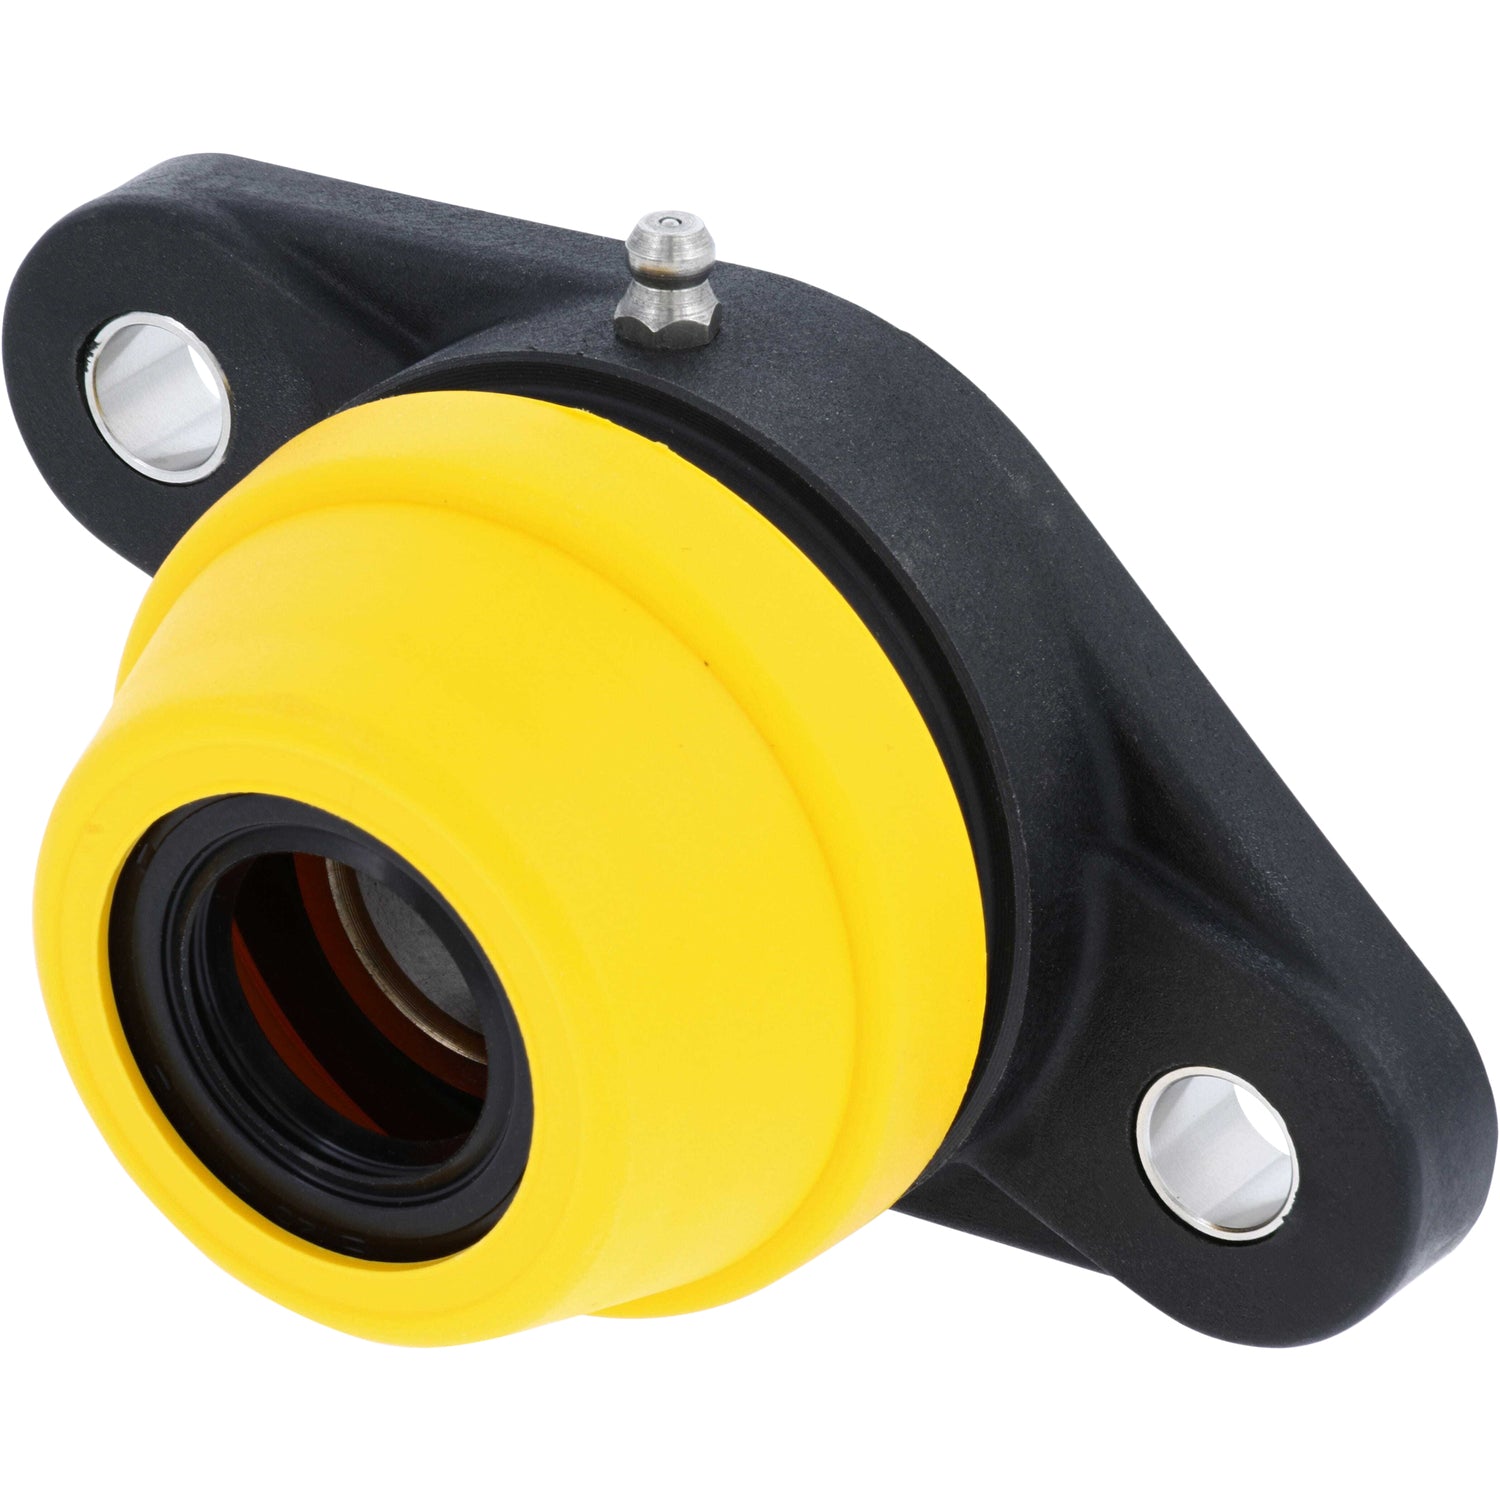 Black pillow block with stainless steel grease zerk and yellow  cap  with hole in center on white background.